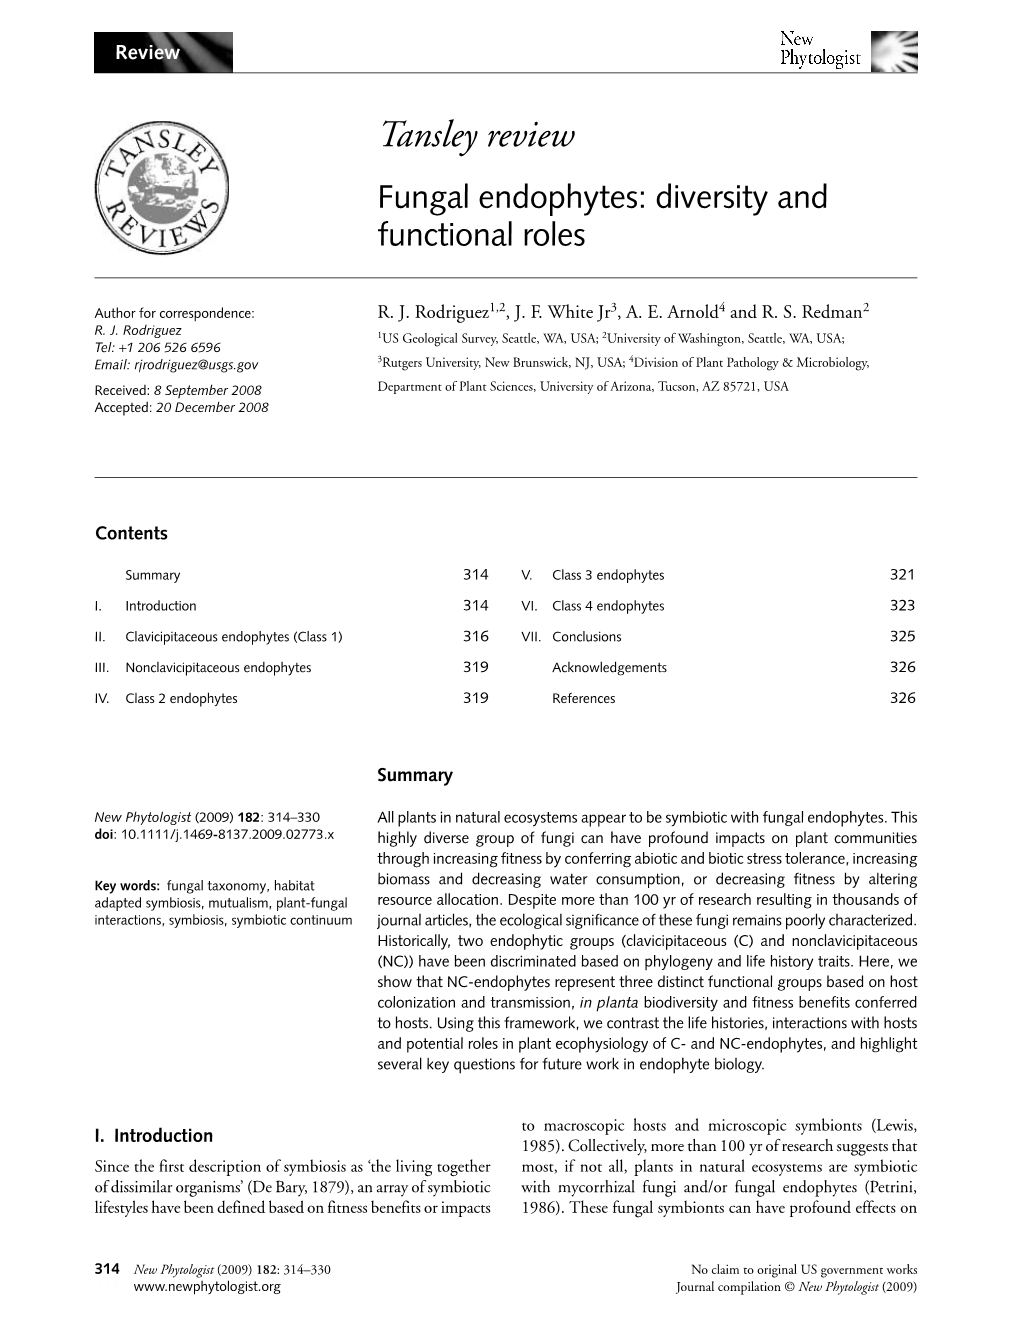 Fungal Endophytes: Diversity and Functional Roles